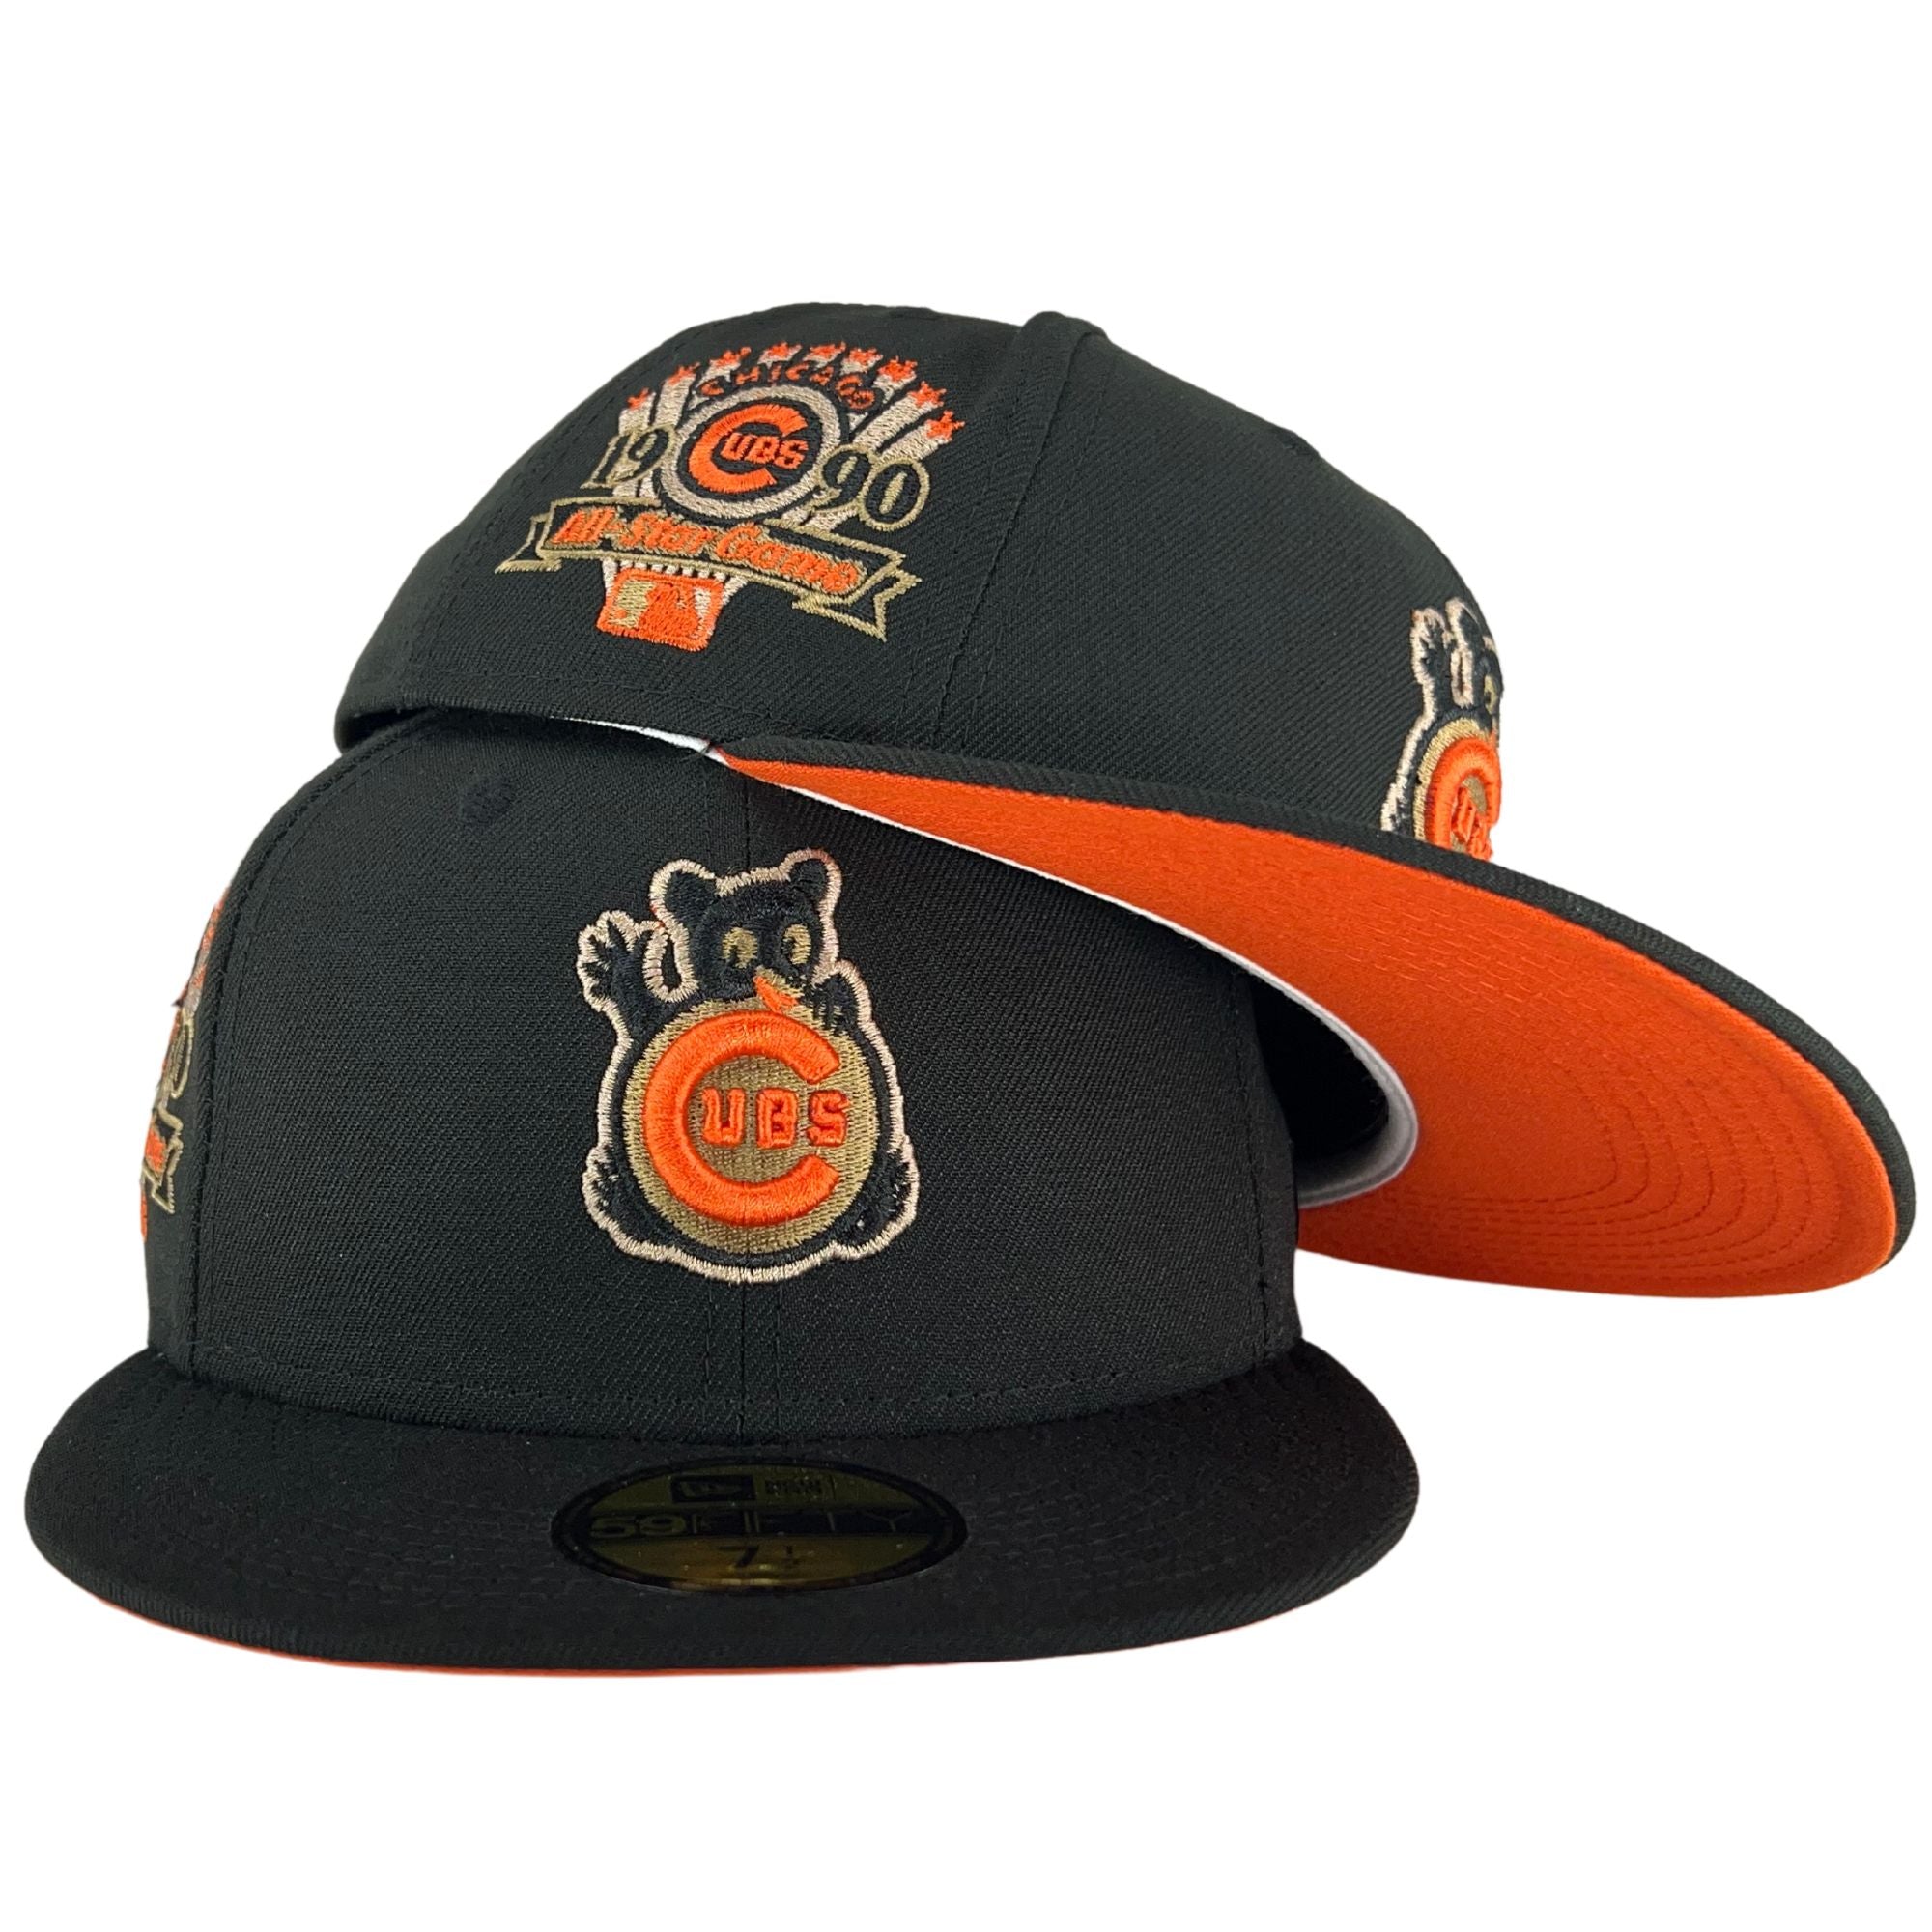 Baltimore Orioles: Reactions to New Era 'Local Market' Hat